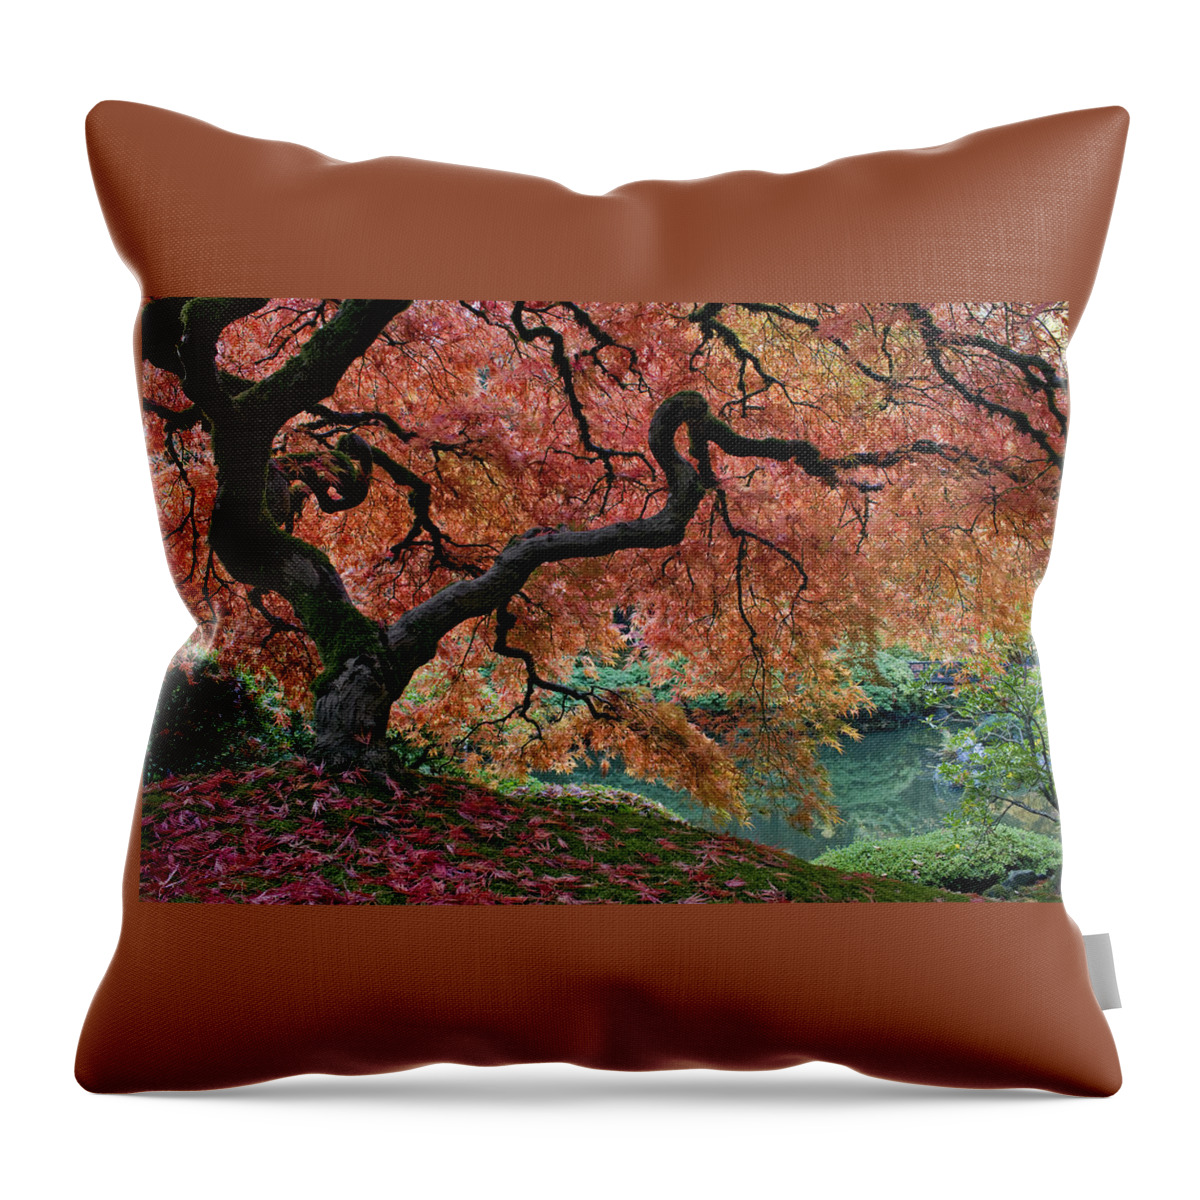 Under Fall's Cover Throw Pillow featuring the photograph Under Fall's Cover by Wes and Dotty Weber